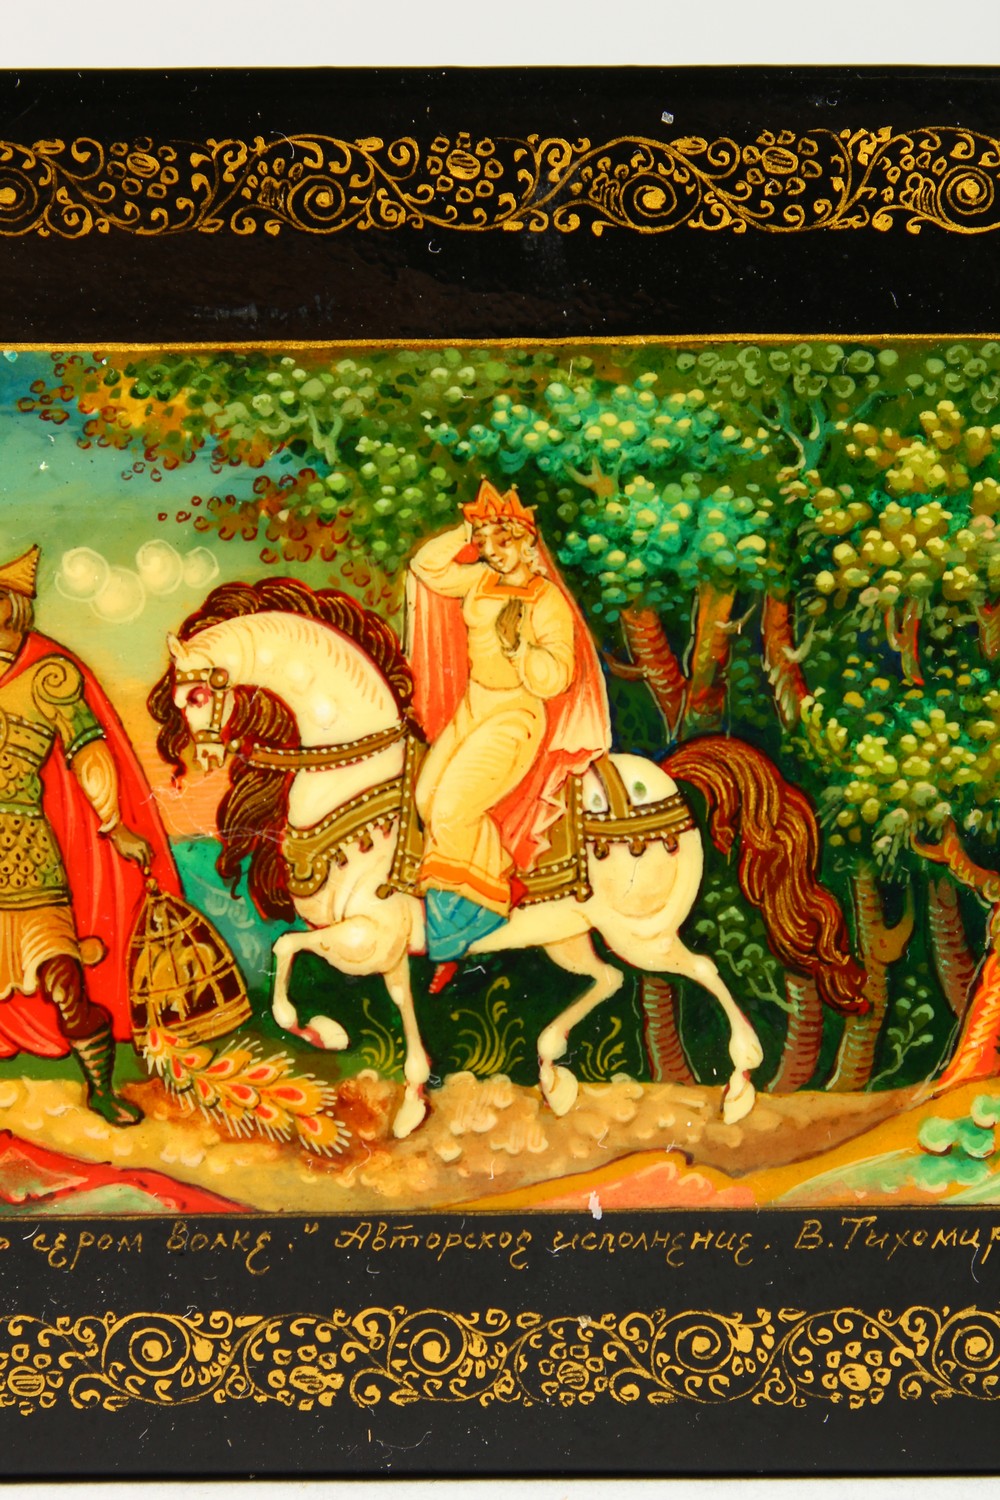 A RUSSIAN BLACK PAPIER MACHE BOX, "Knight and Lady on Horseback", in original cardboard box. 4. - Image 6 of 14